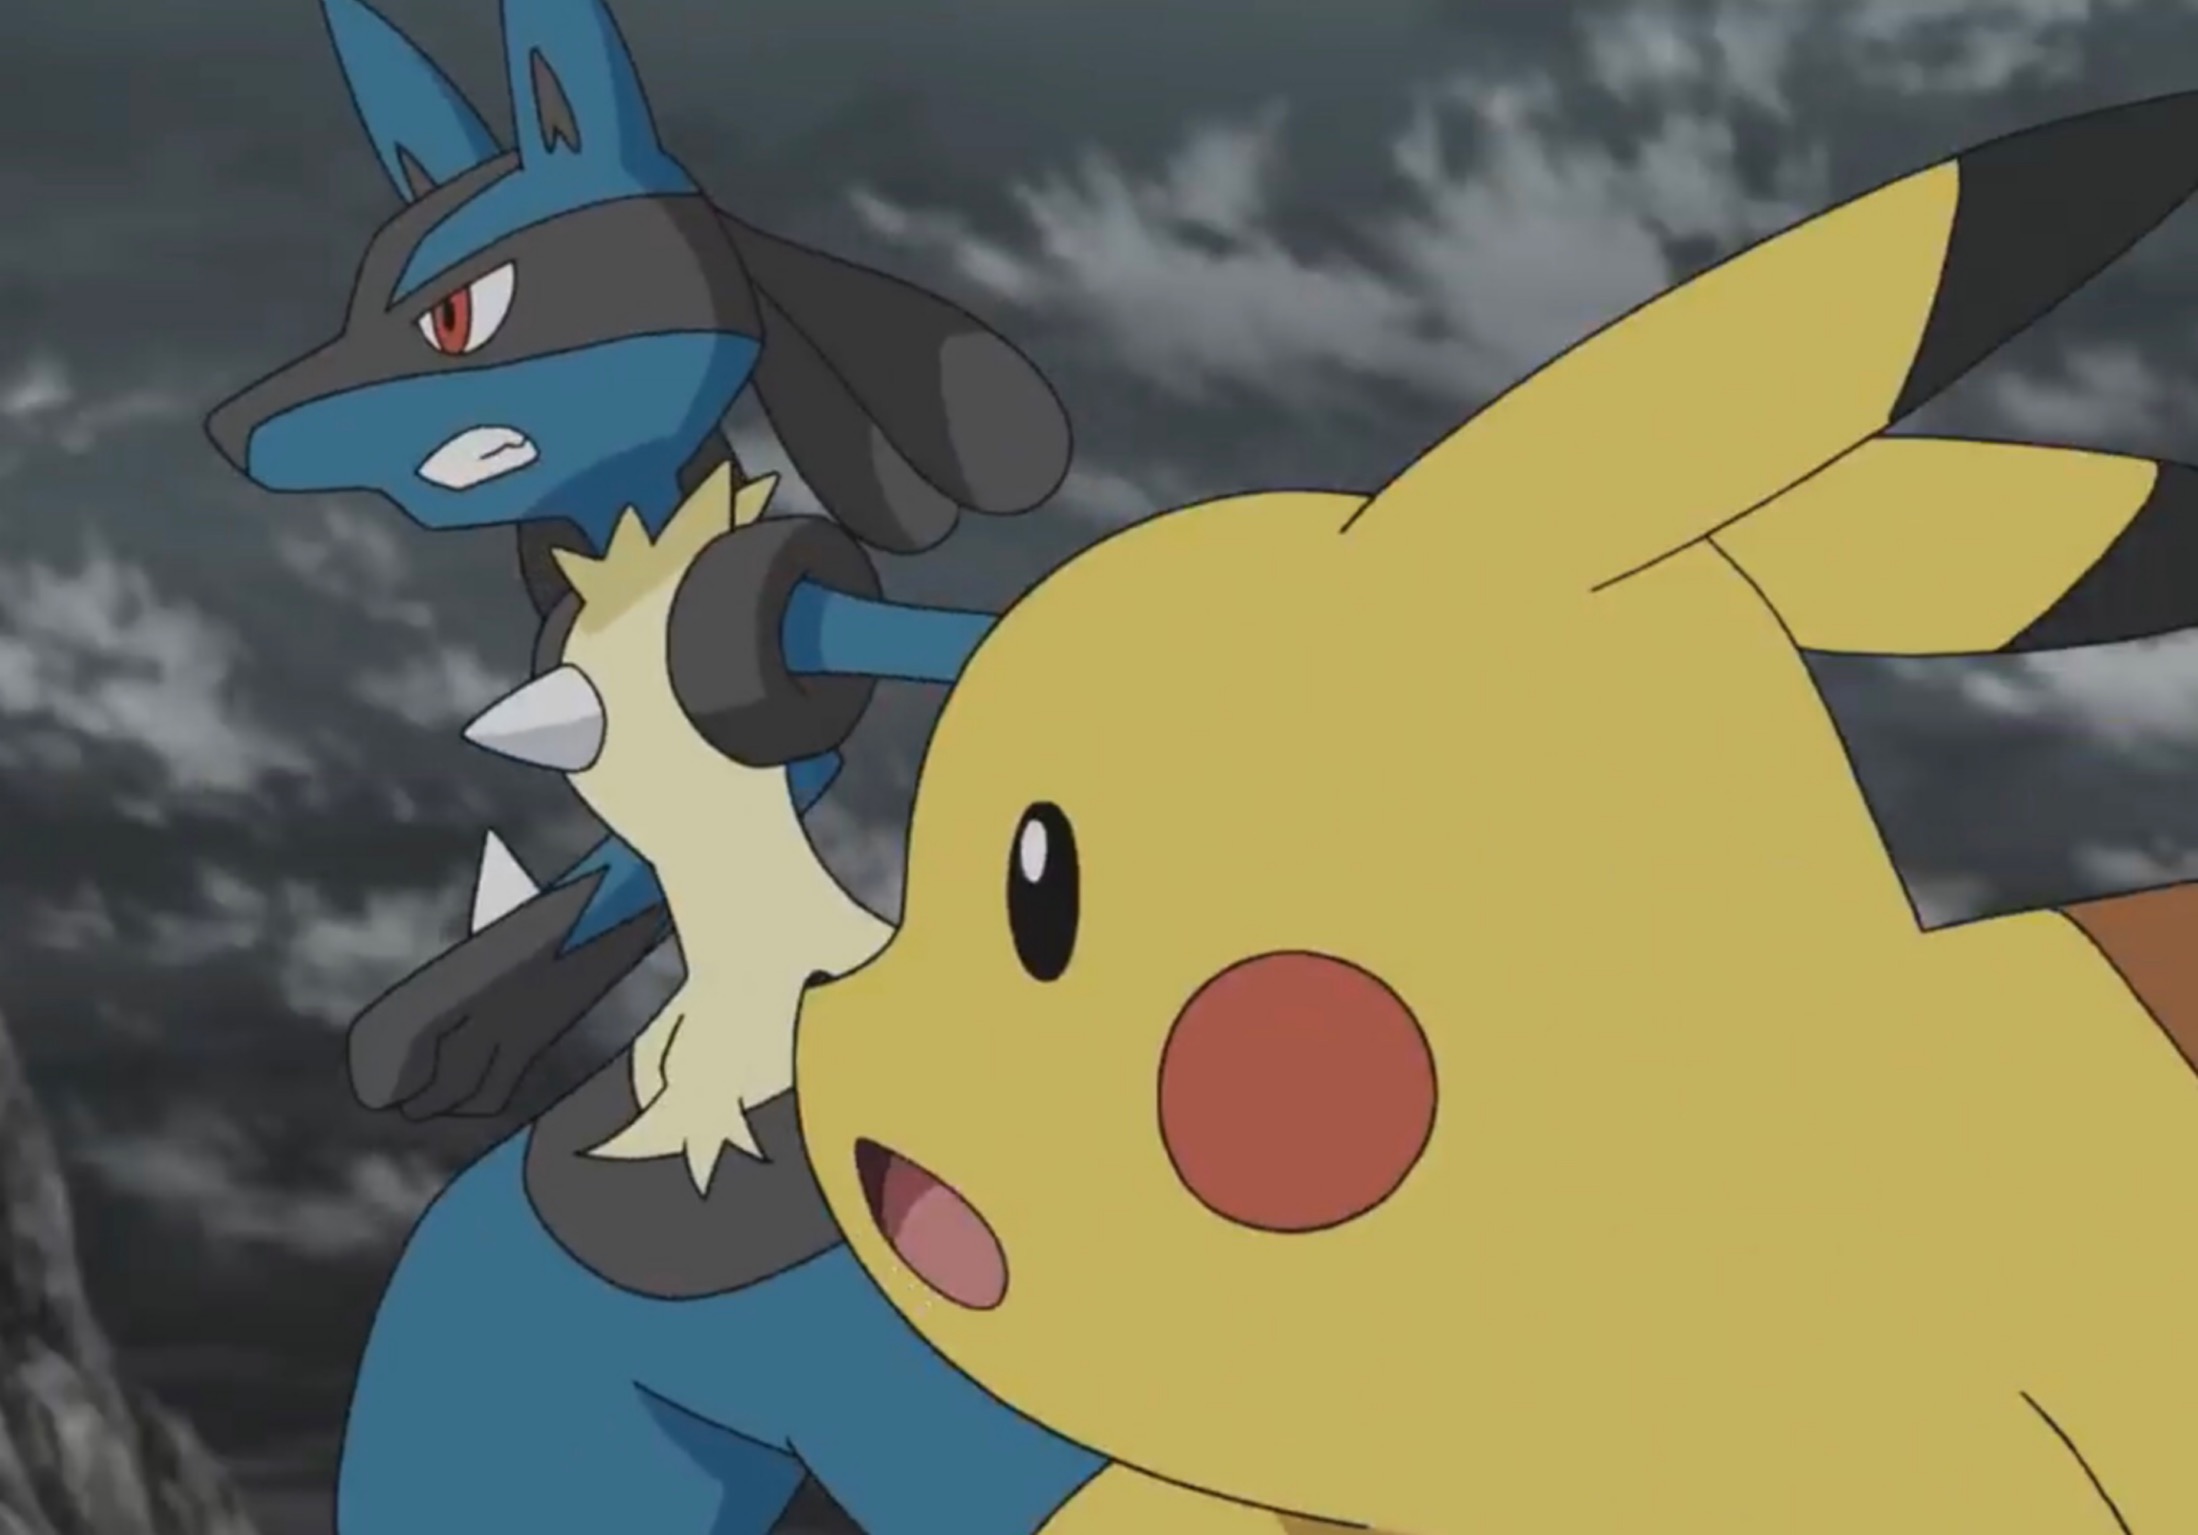 Pikachu And Lucario teaming up during a battle